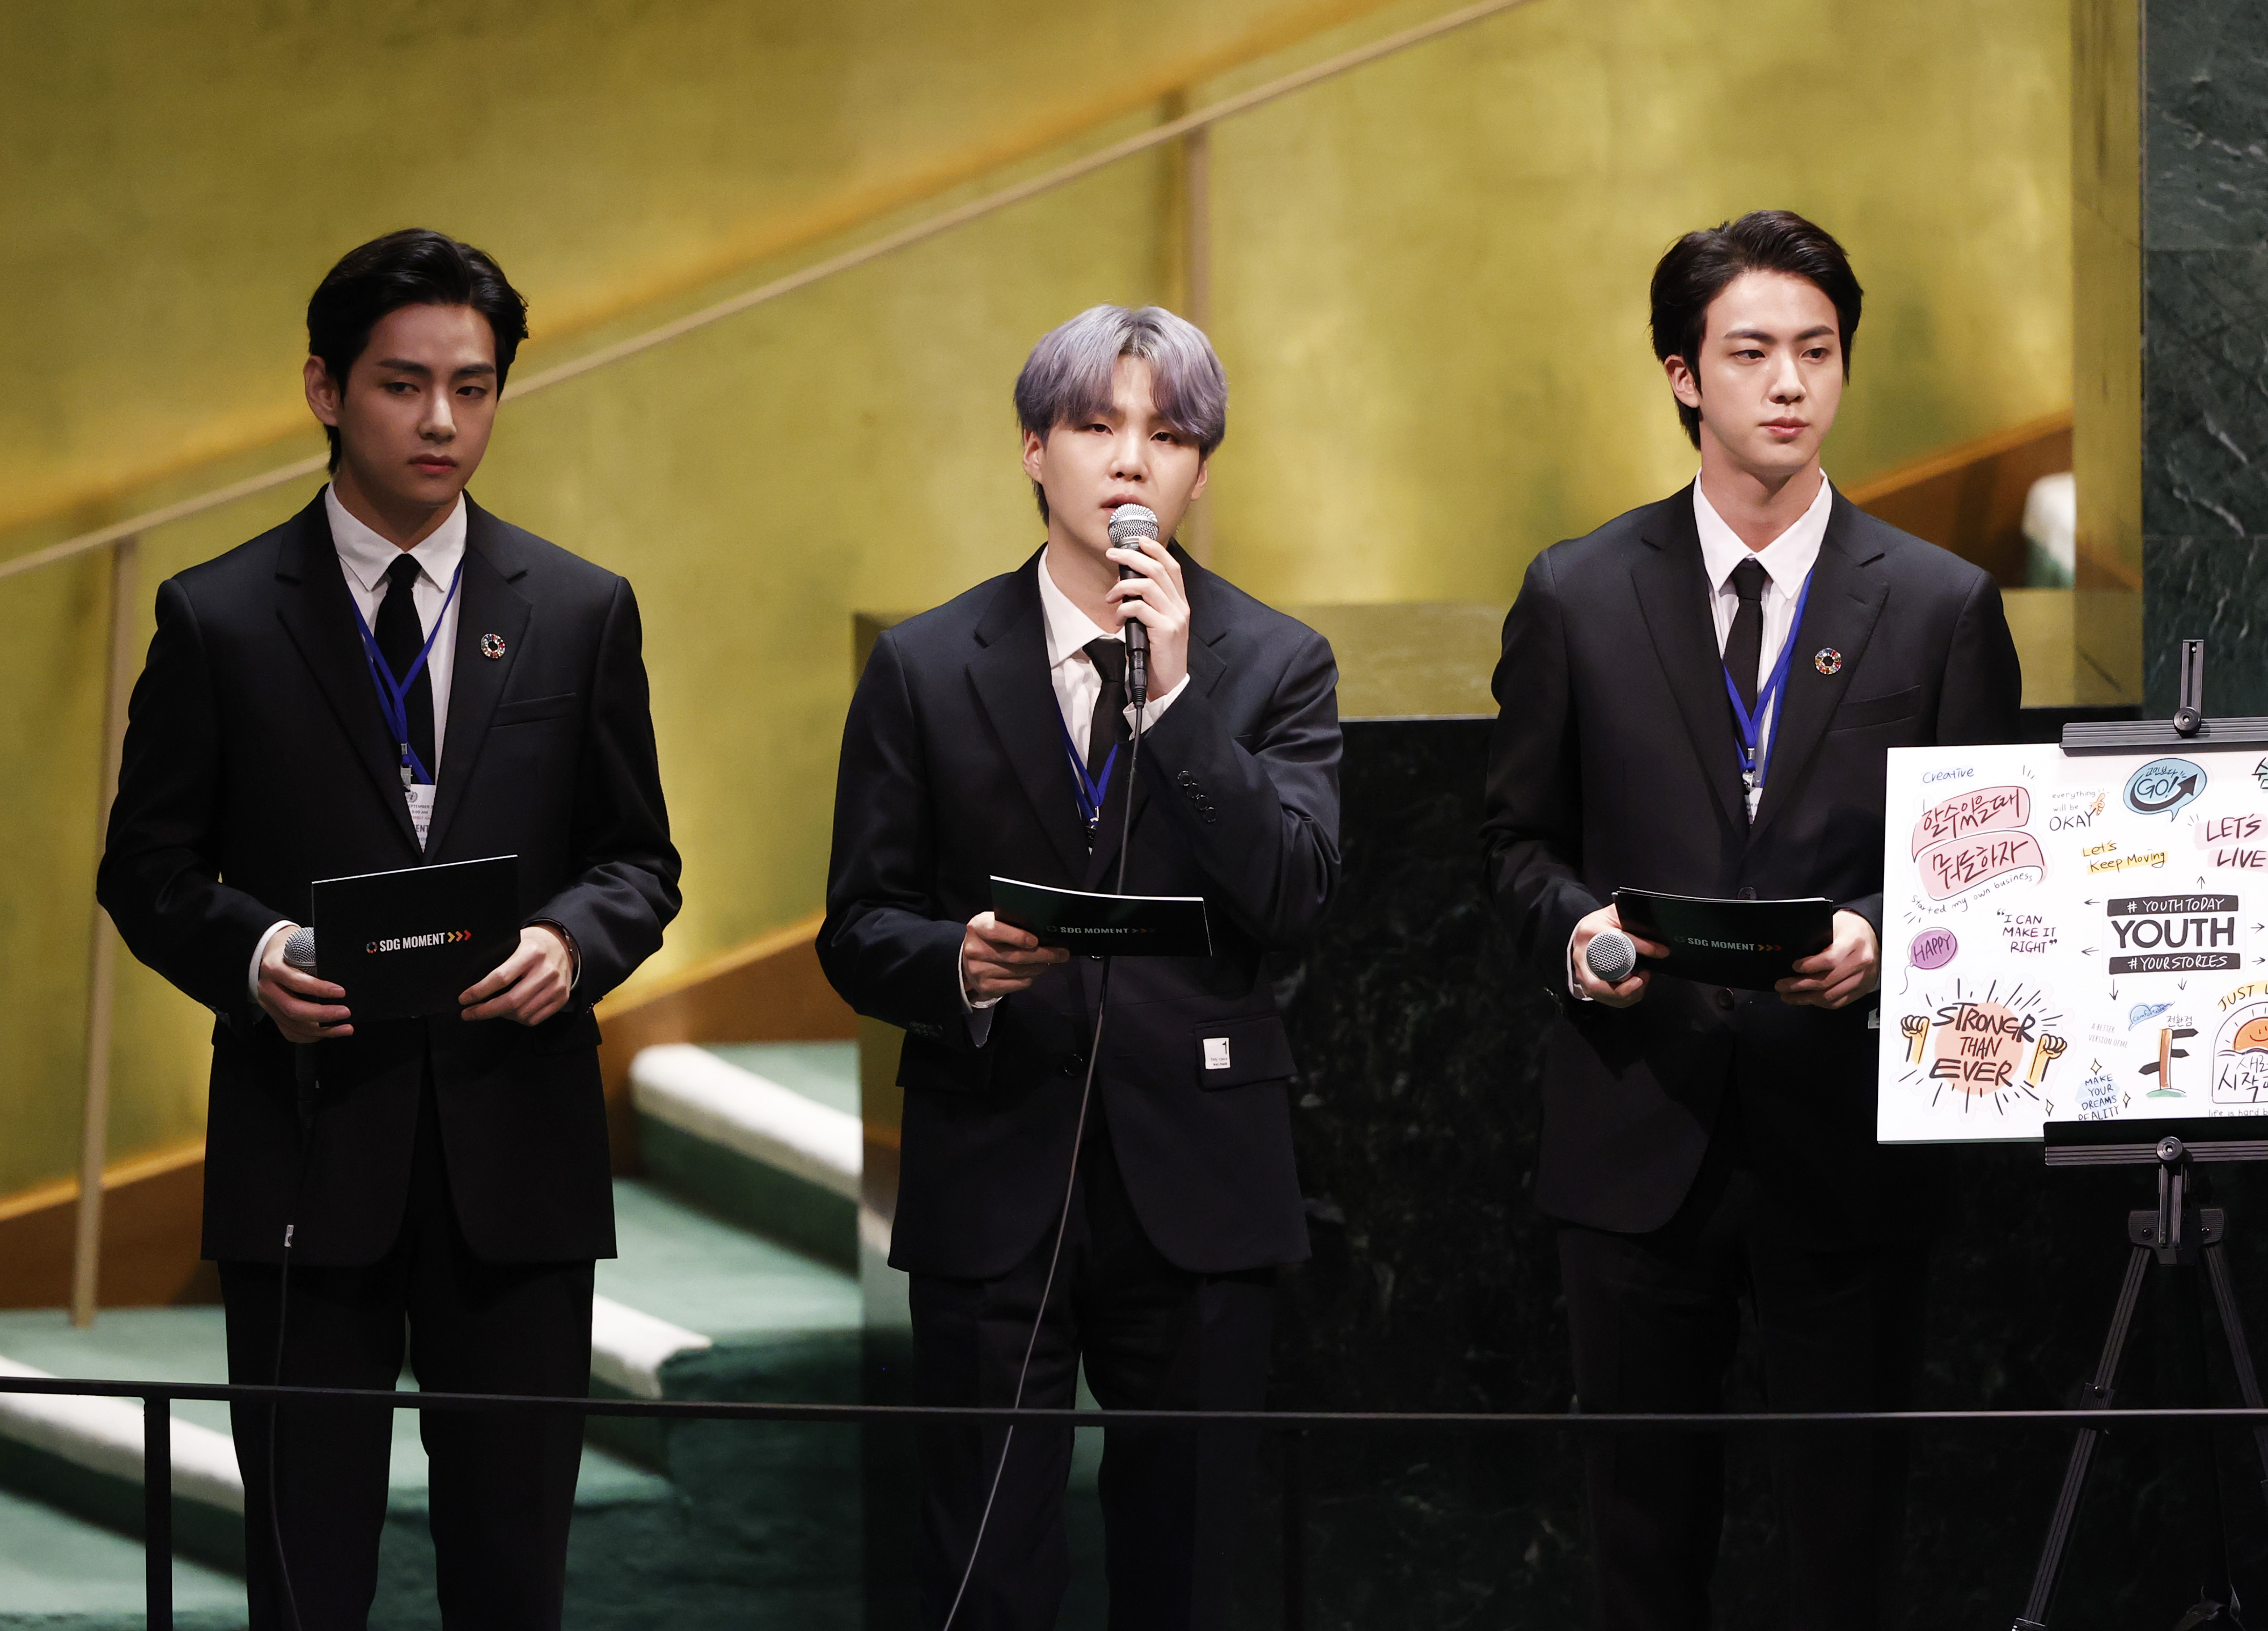 Taehyung/V, Suga, and Jin of BTS at the SDG Moment event as part of the UN General Assembly 76th session General Debate